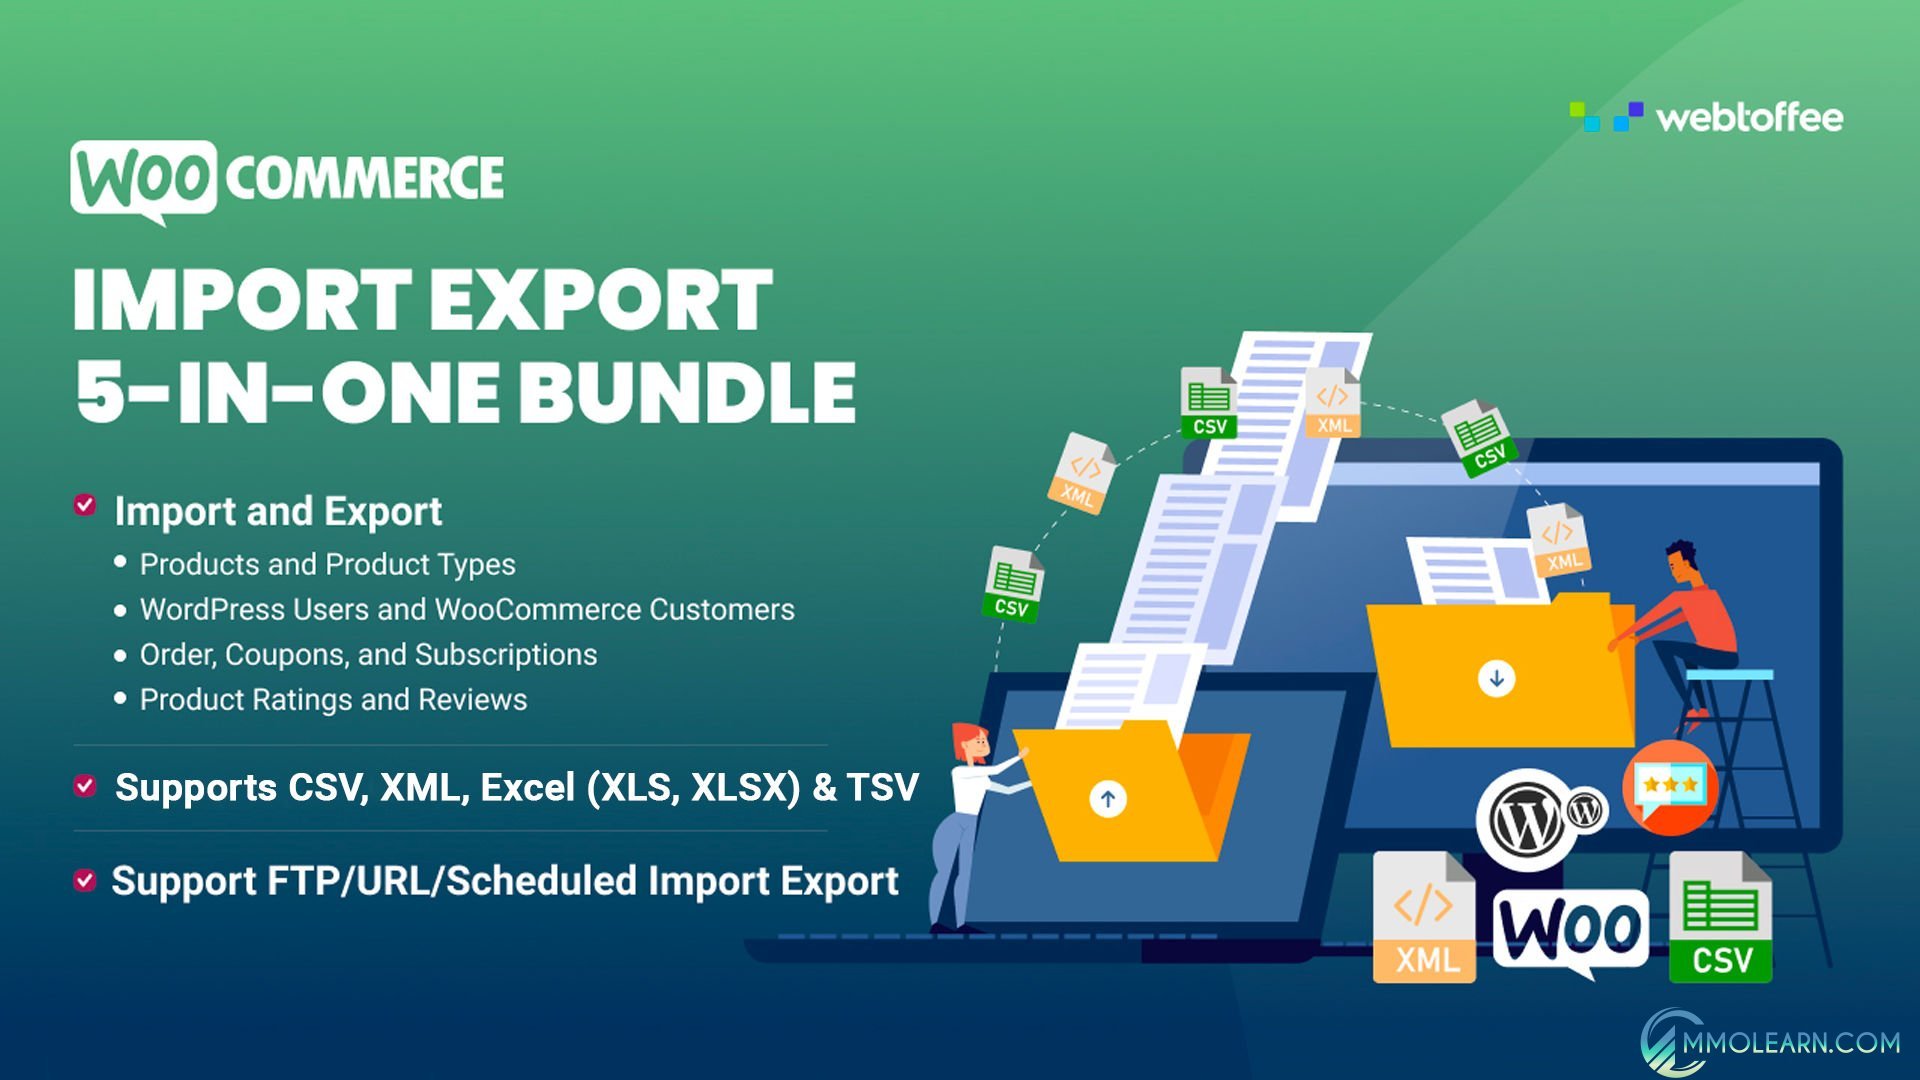 All-in-one WooCommerce Import Export Suite.jpg